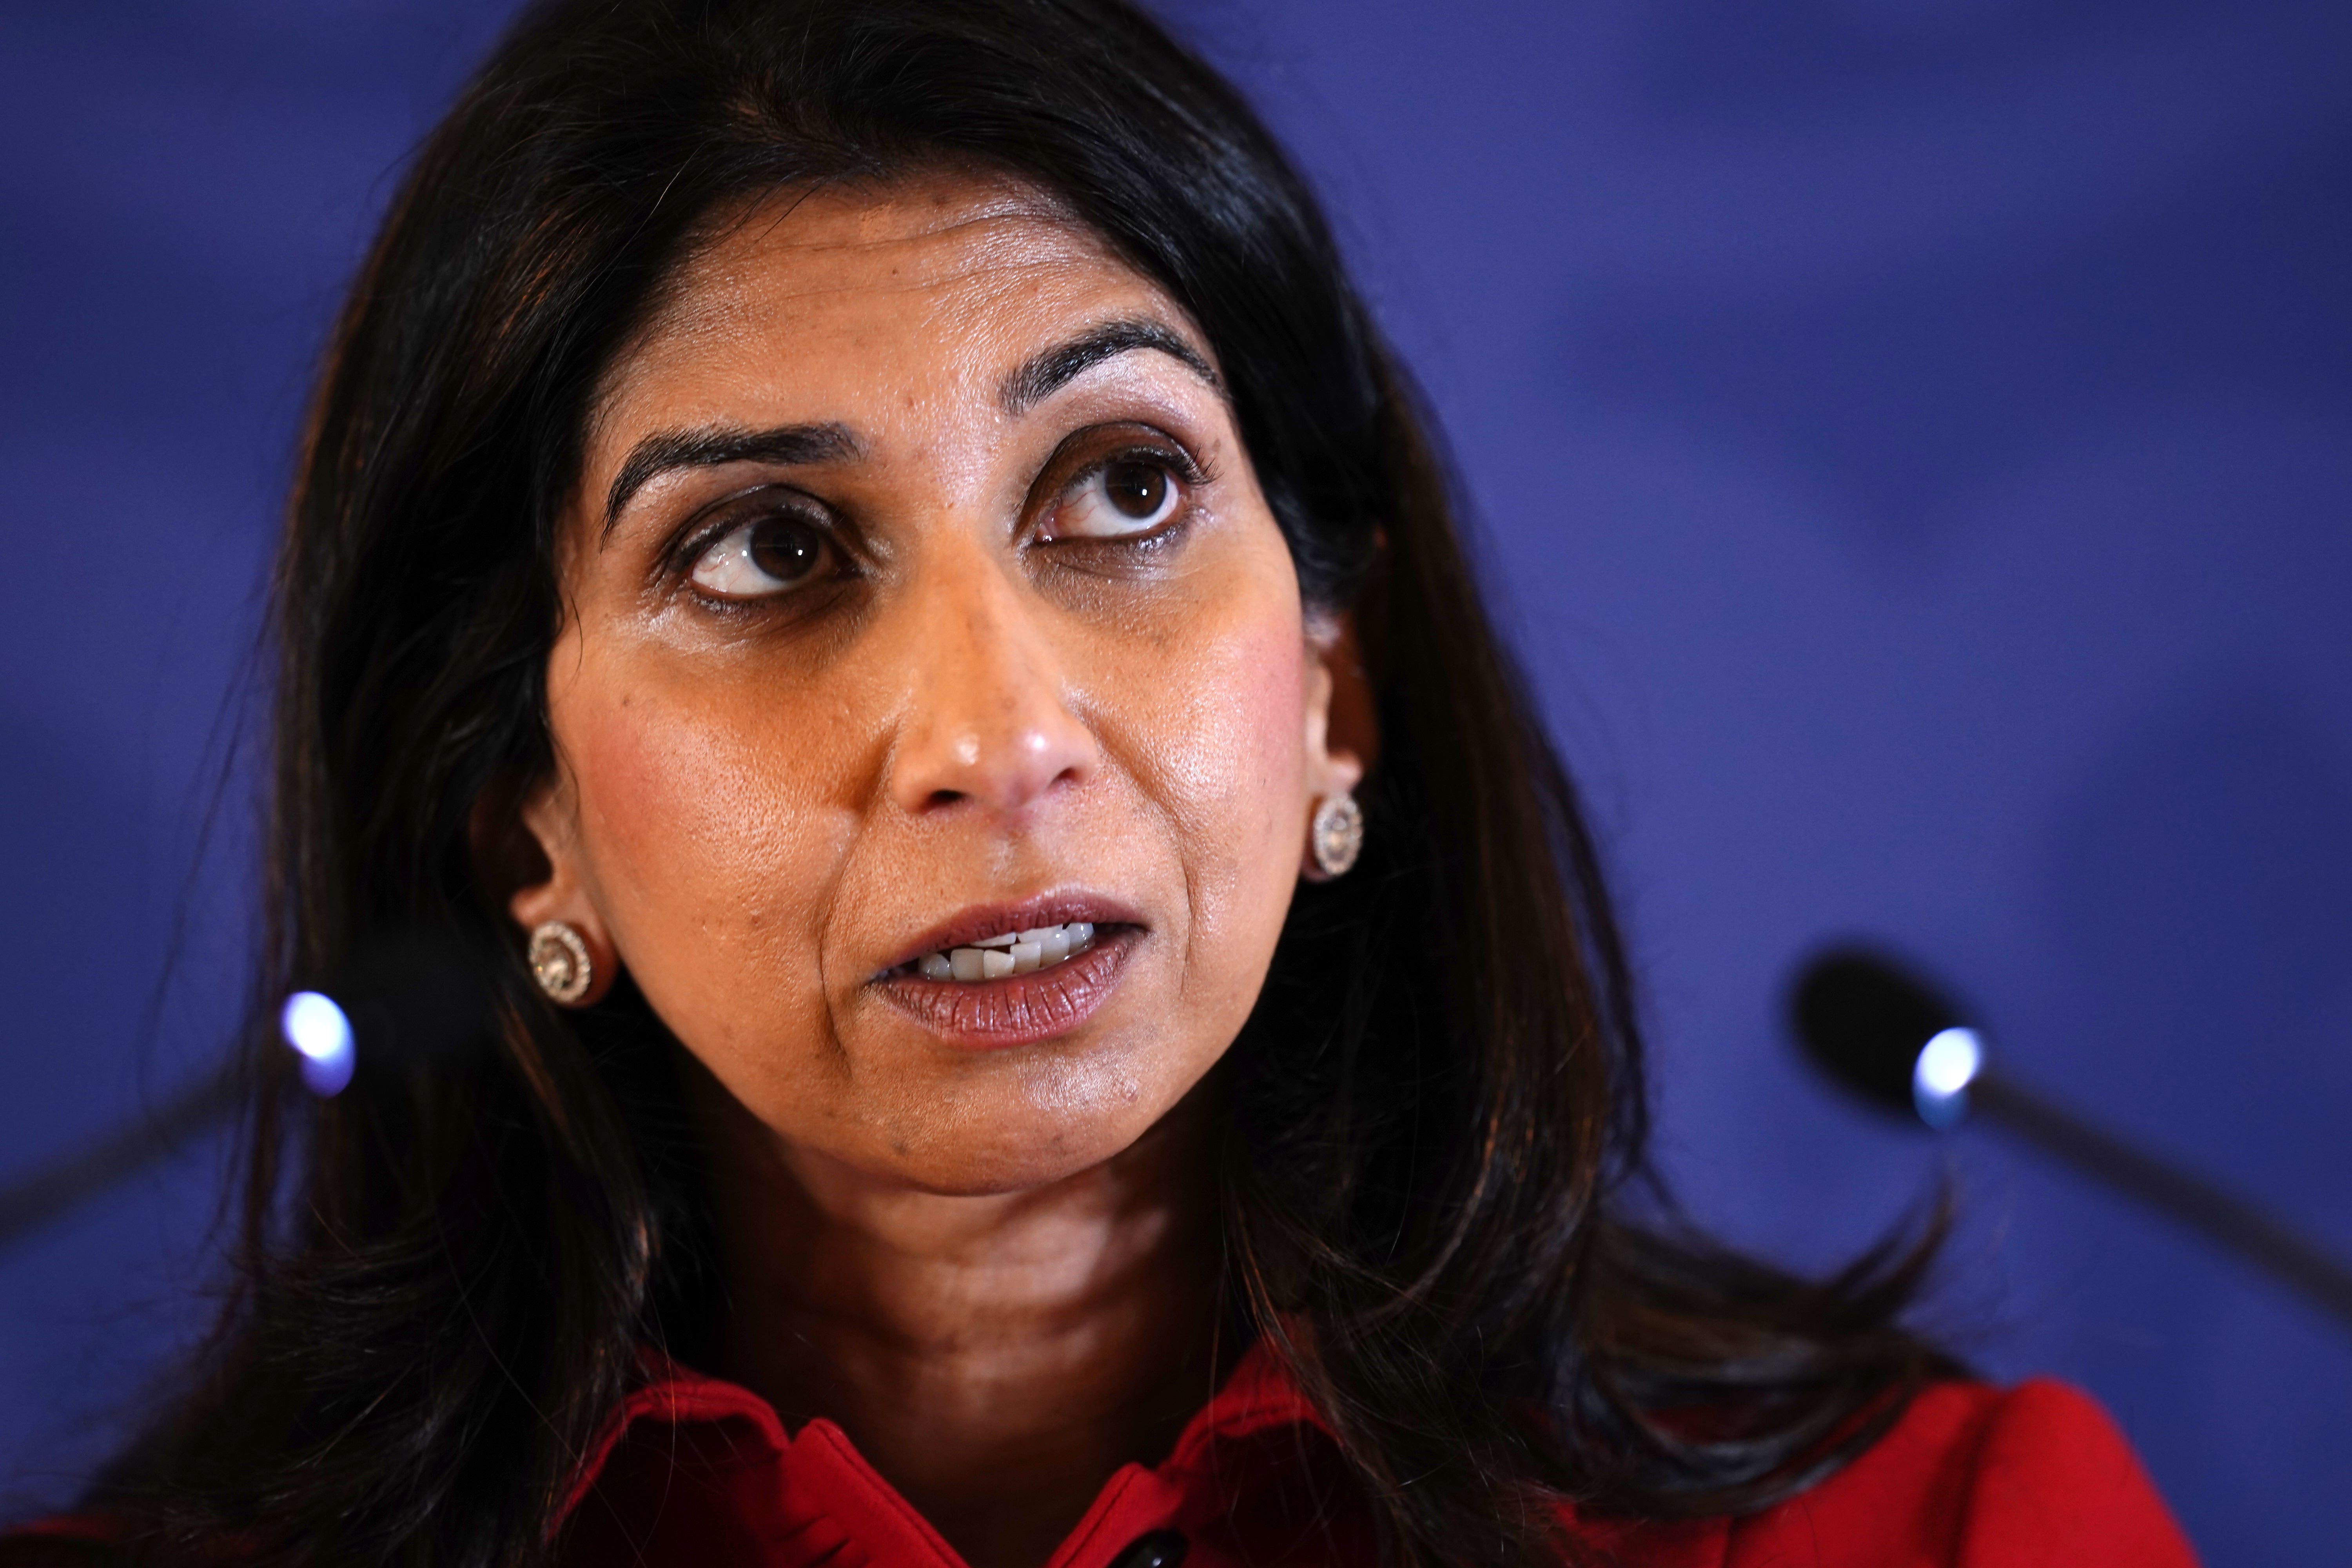 Suella Braverman warned that the risk from terrorism was rising last month, but the Commission for Countering Extremism has returned £1m of funding in two years